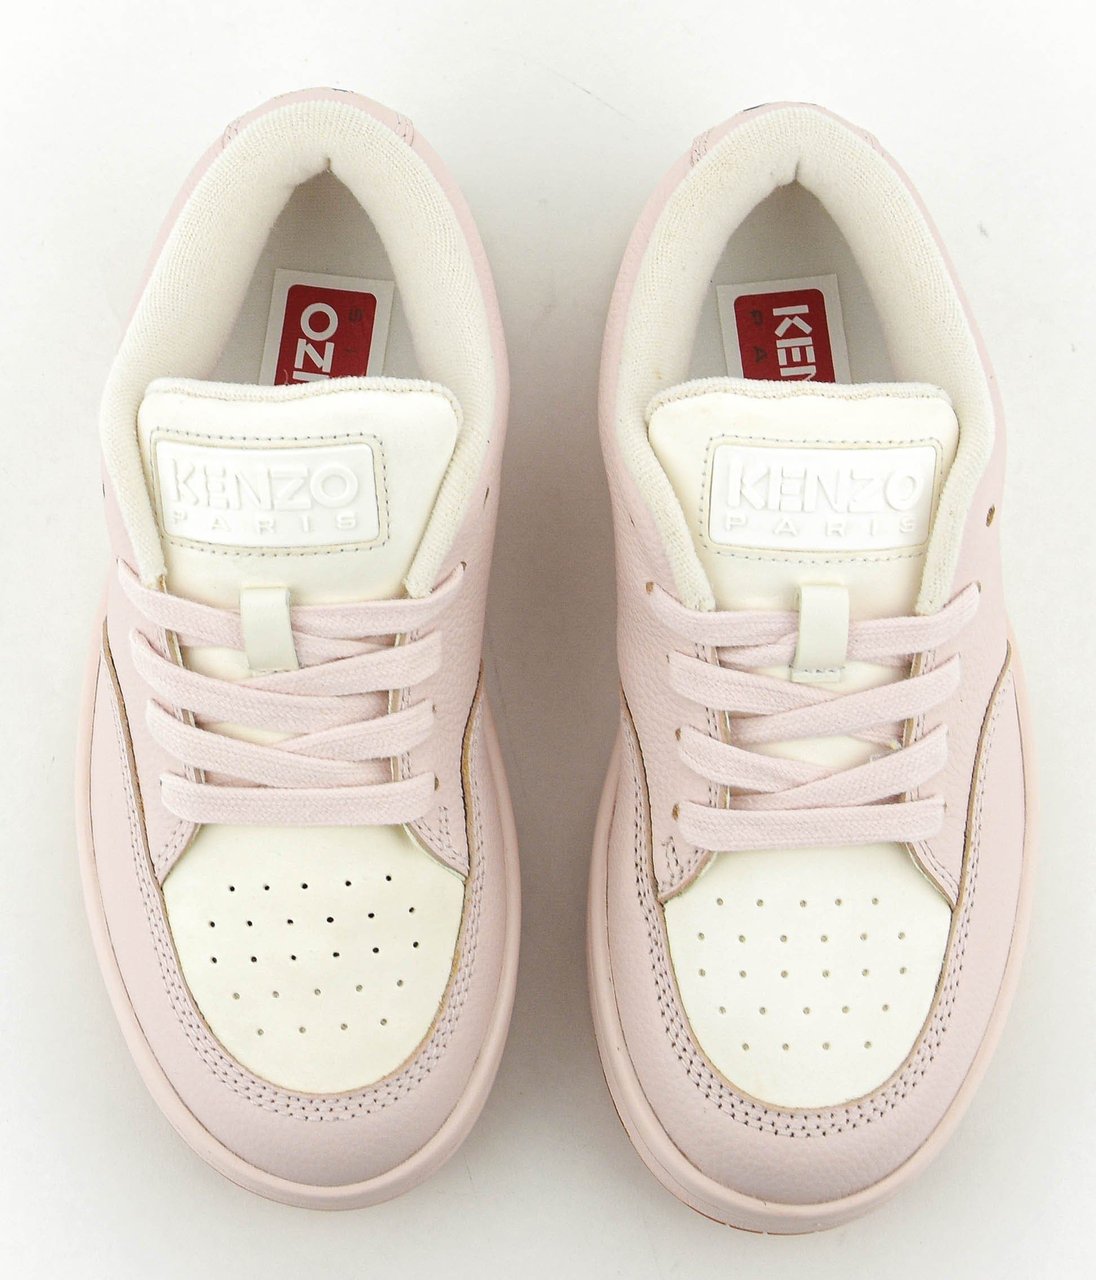 Kenzo Dome Trainer Pink Divers